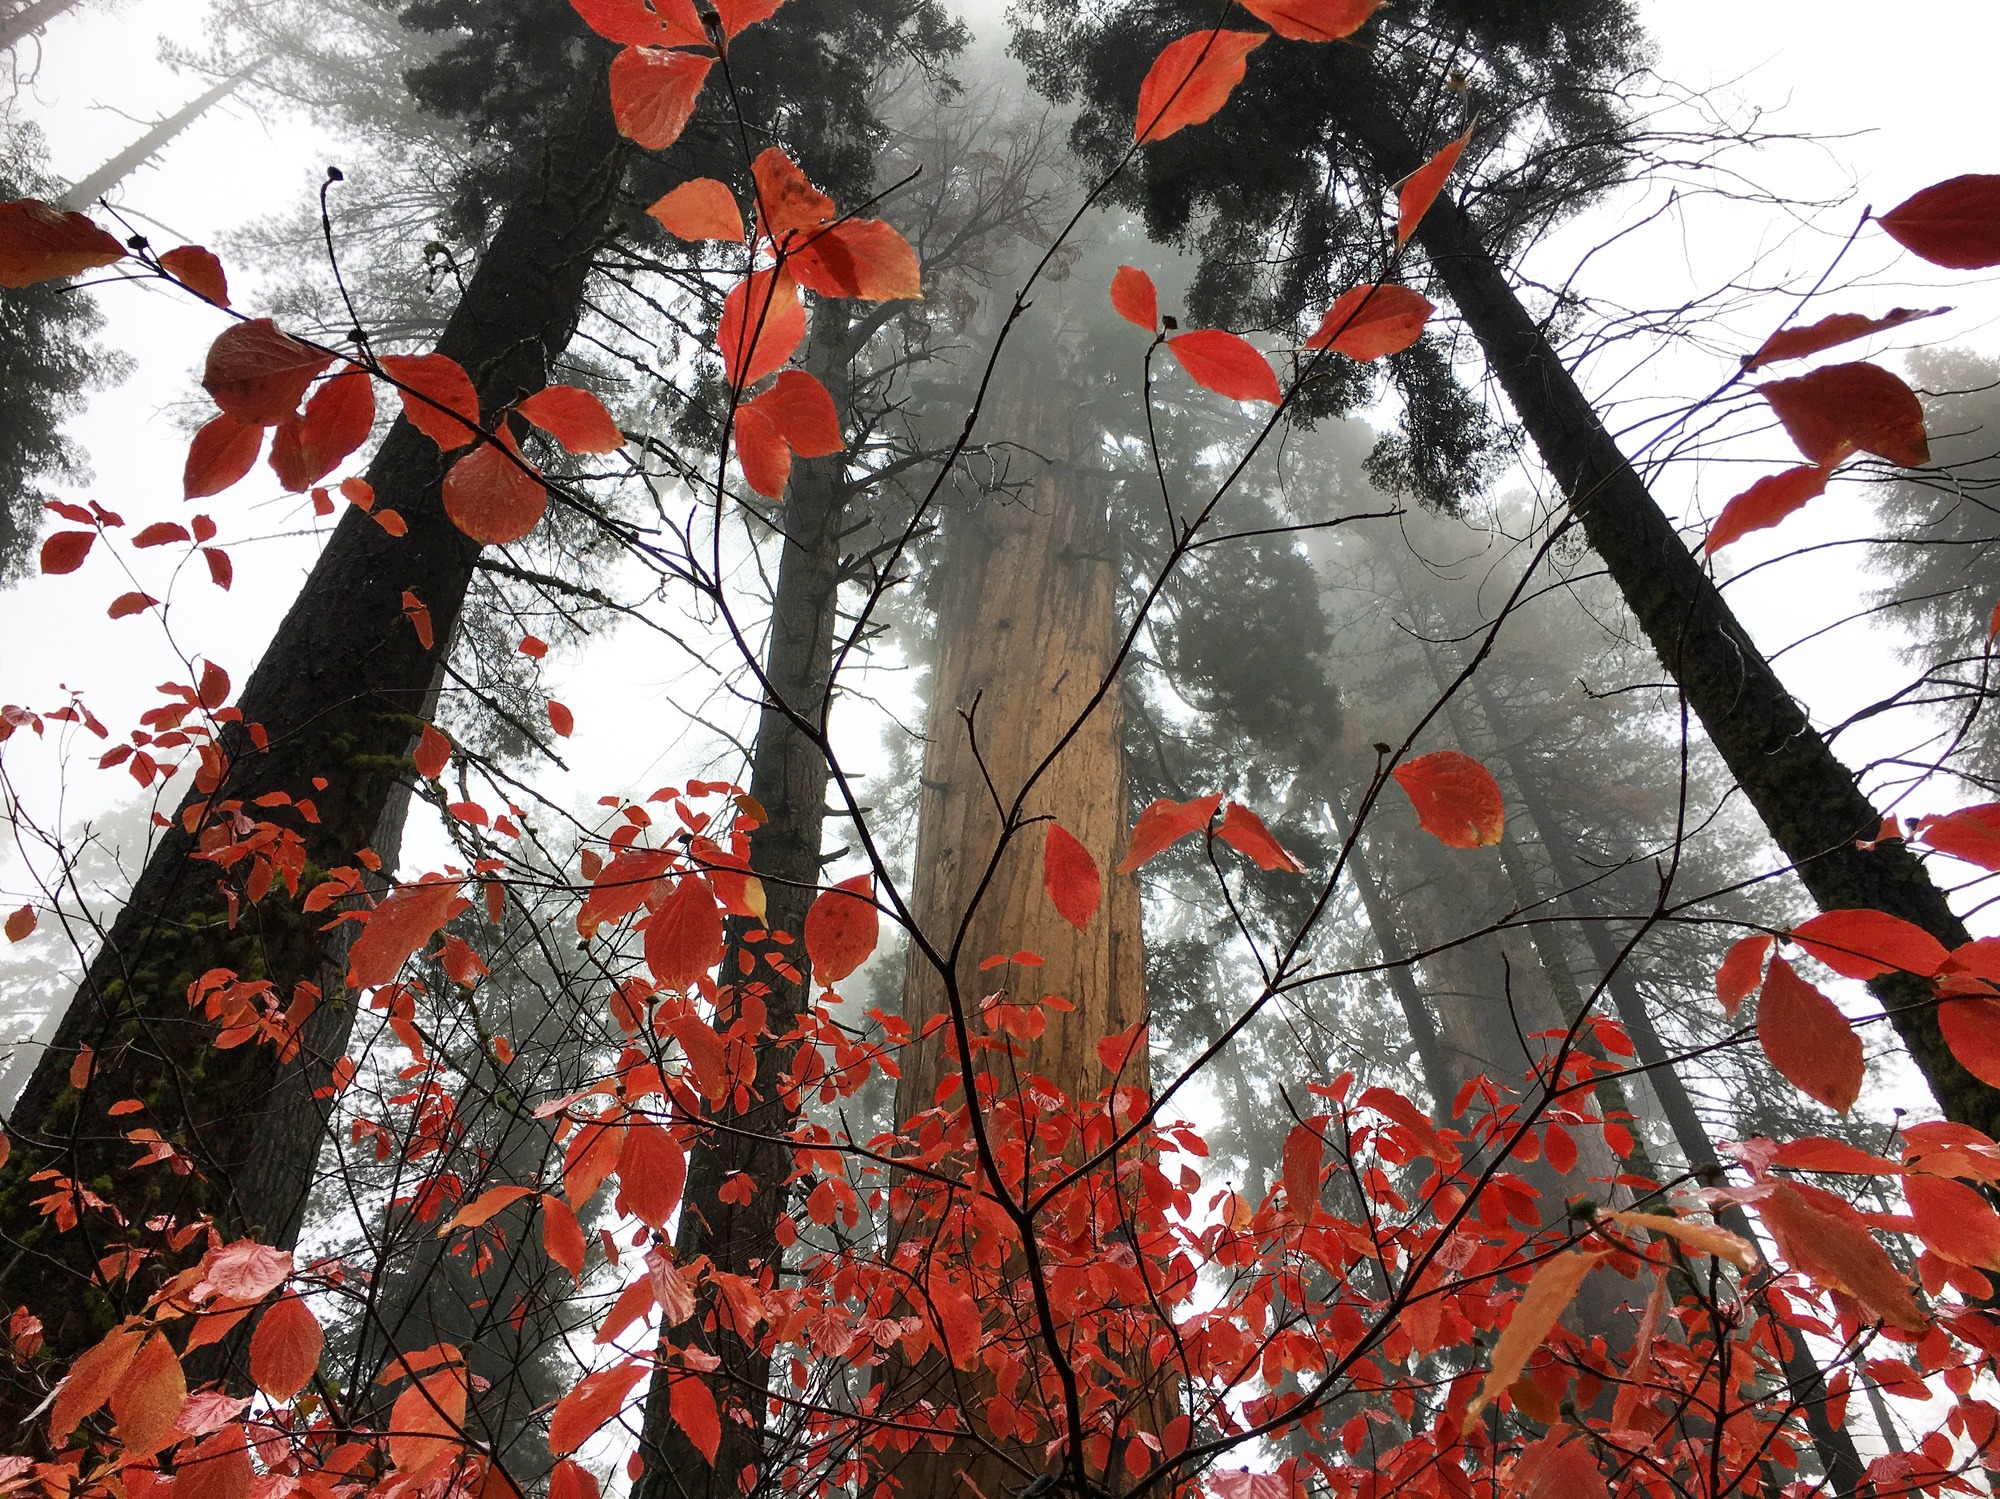 Tree leaves turn red on the floor of a foggy sequoia grove. 